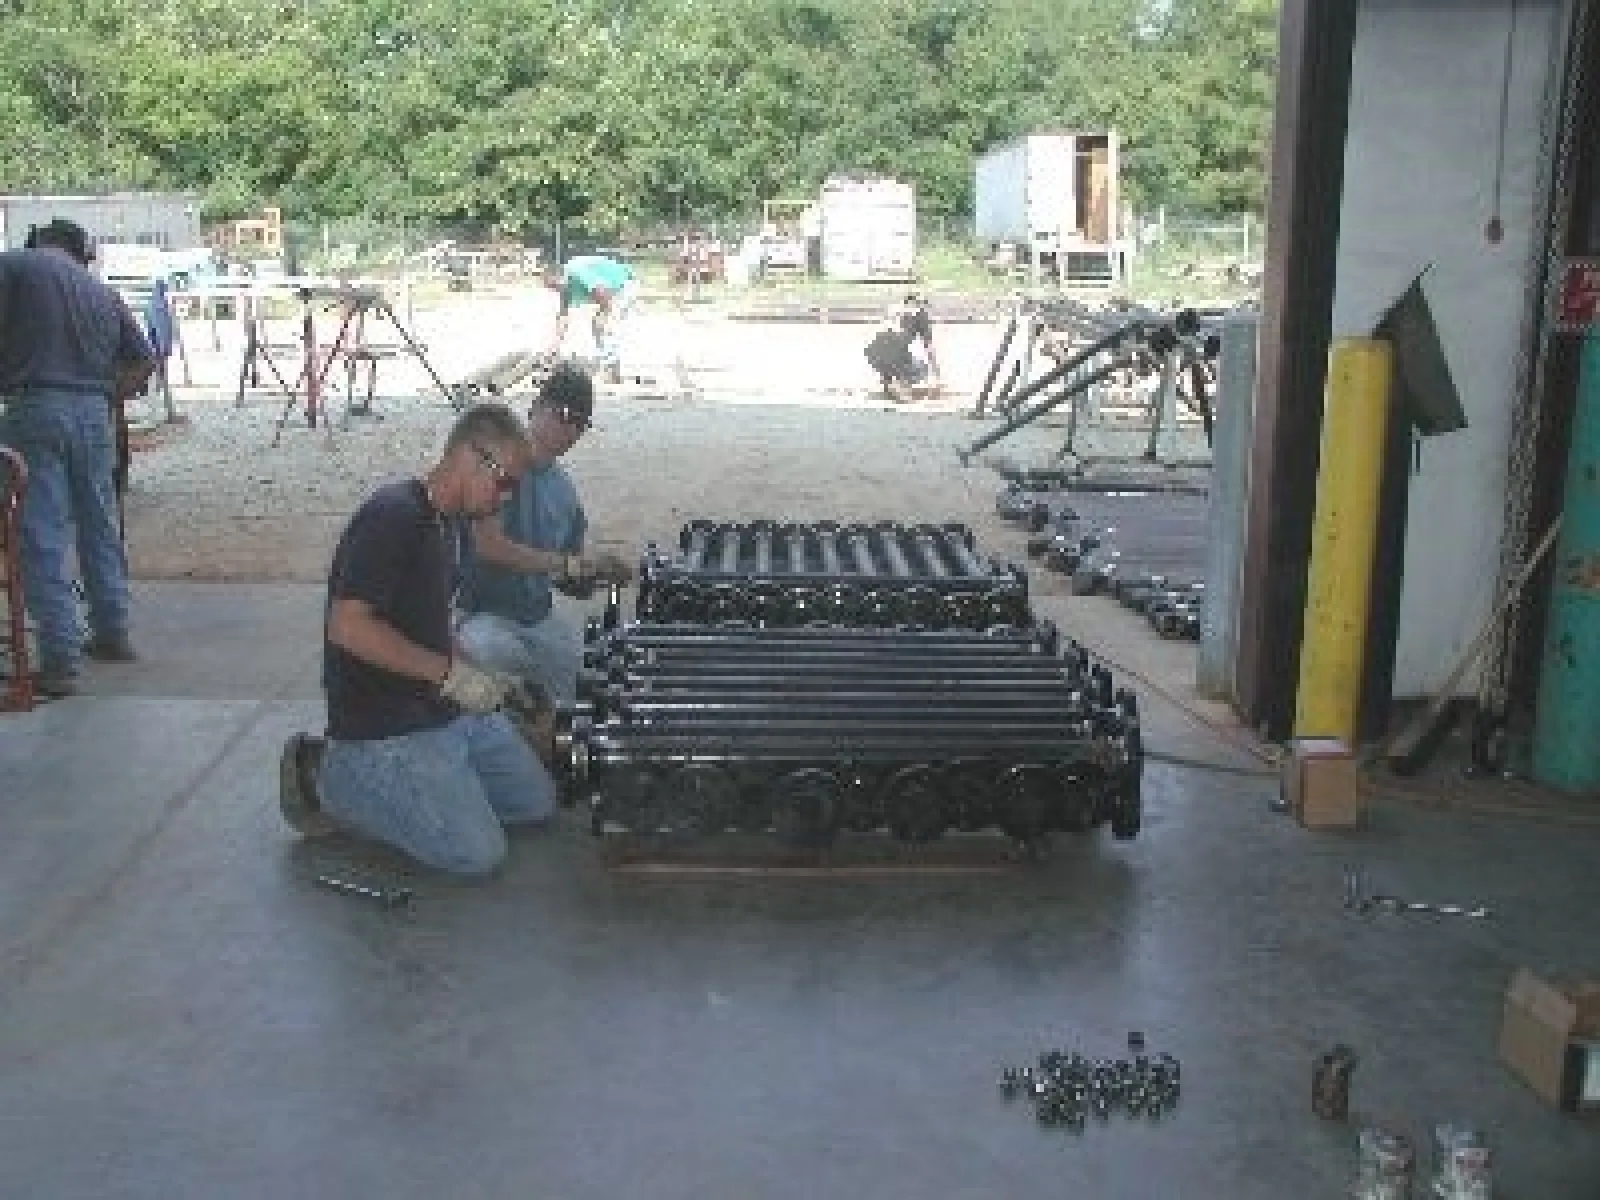 a group of men working on a machine